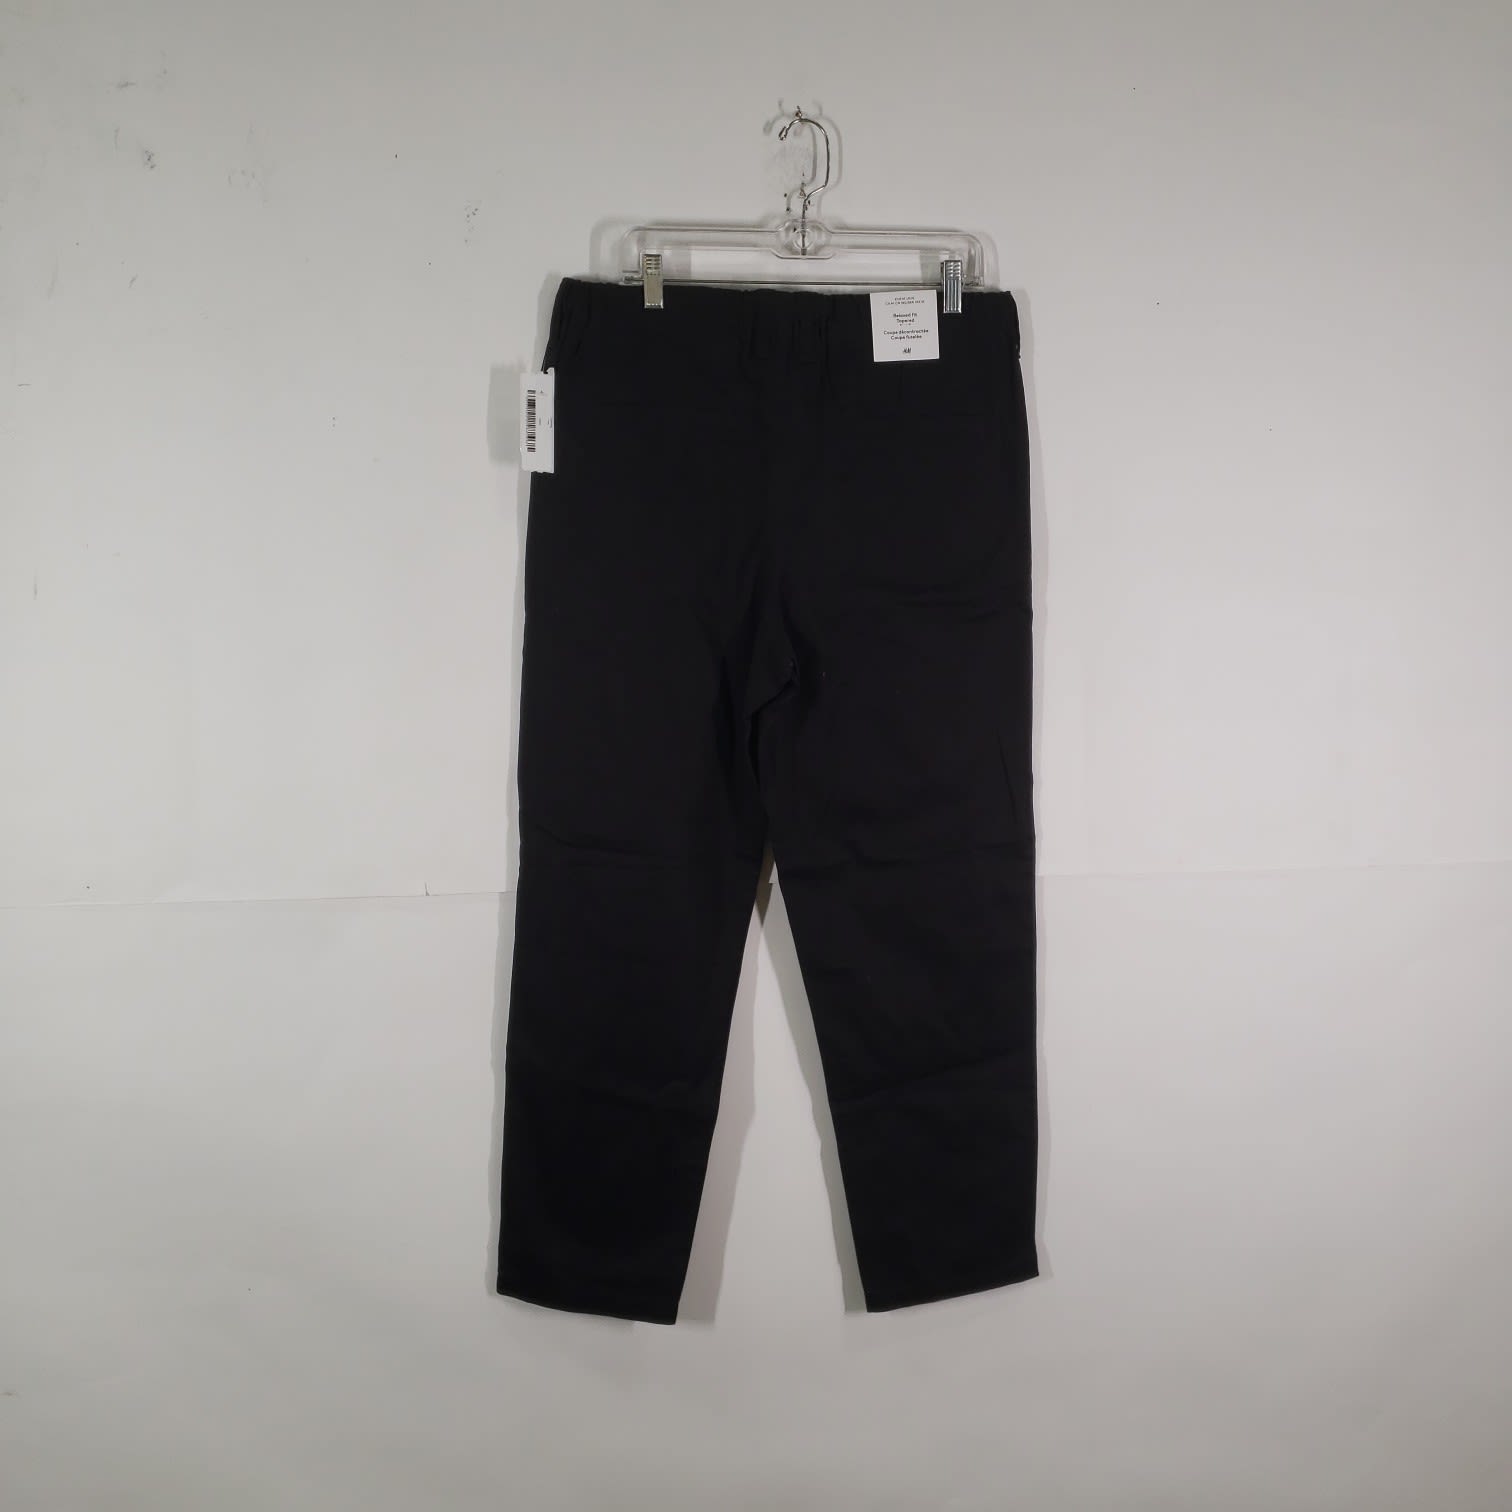 Reserve Collection Tailored Fit Flat Front Chino Pants CLEARANCE